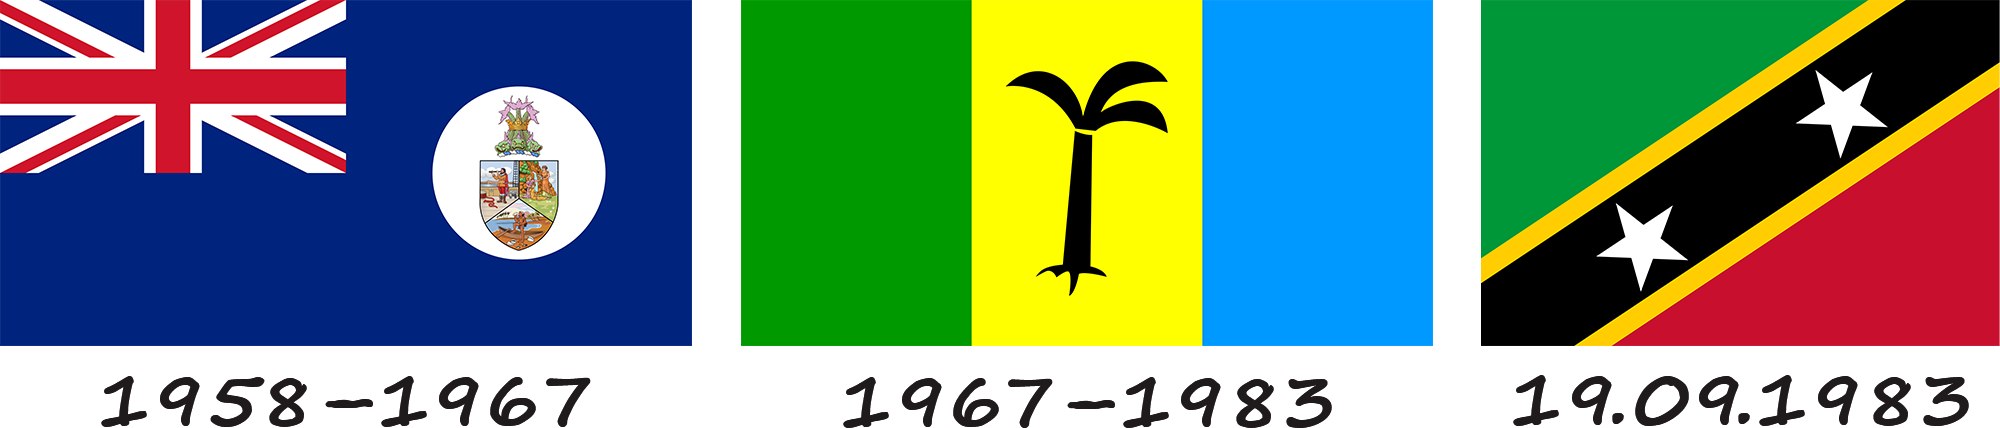 History of the flag of St. Kitts and Nevis